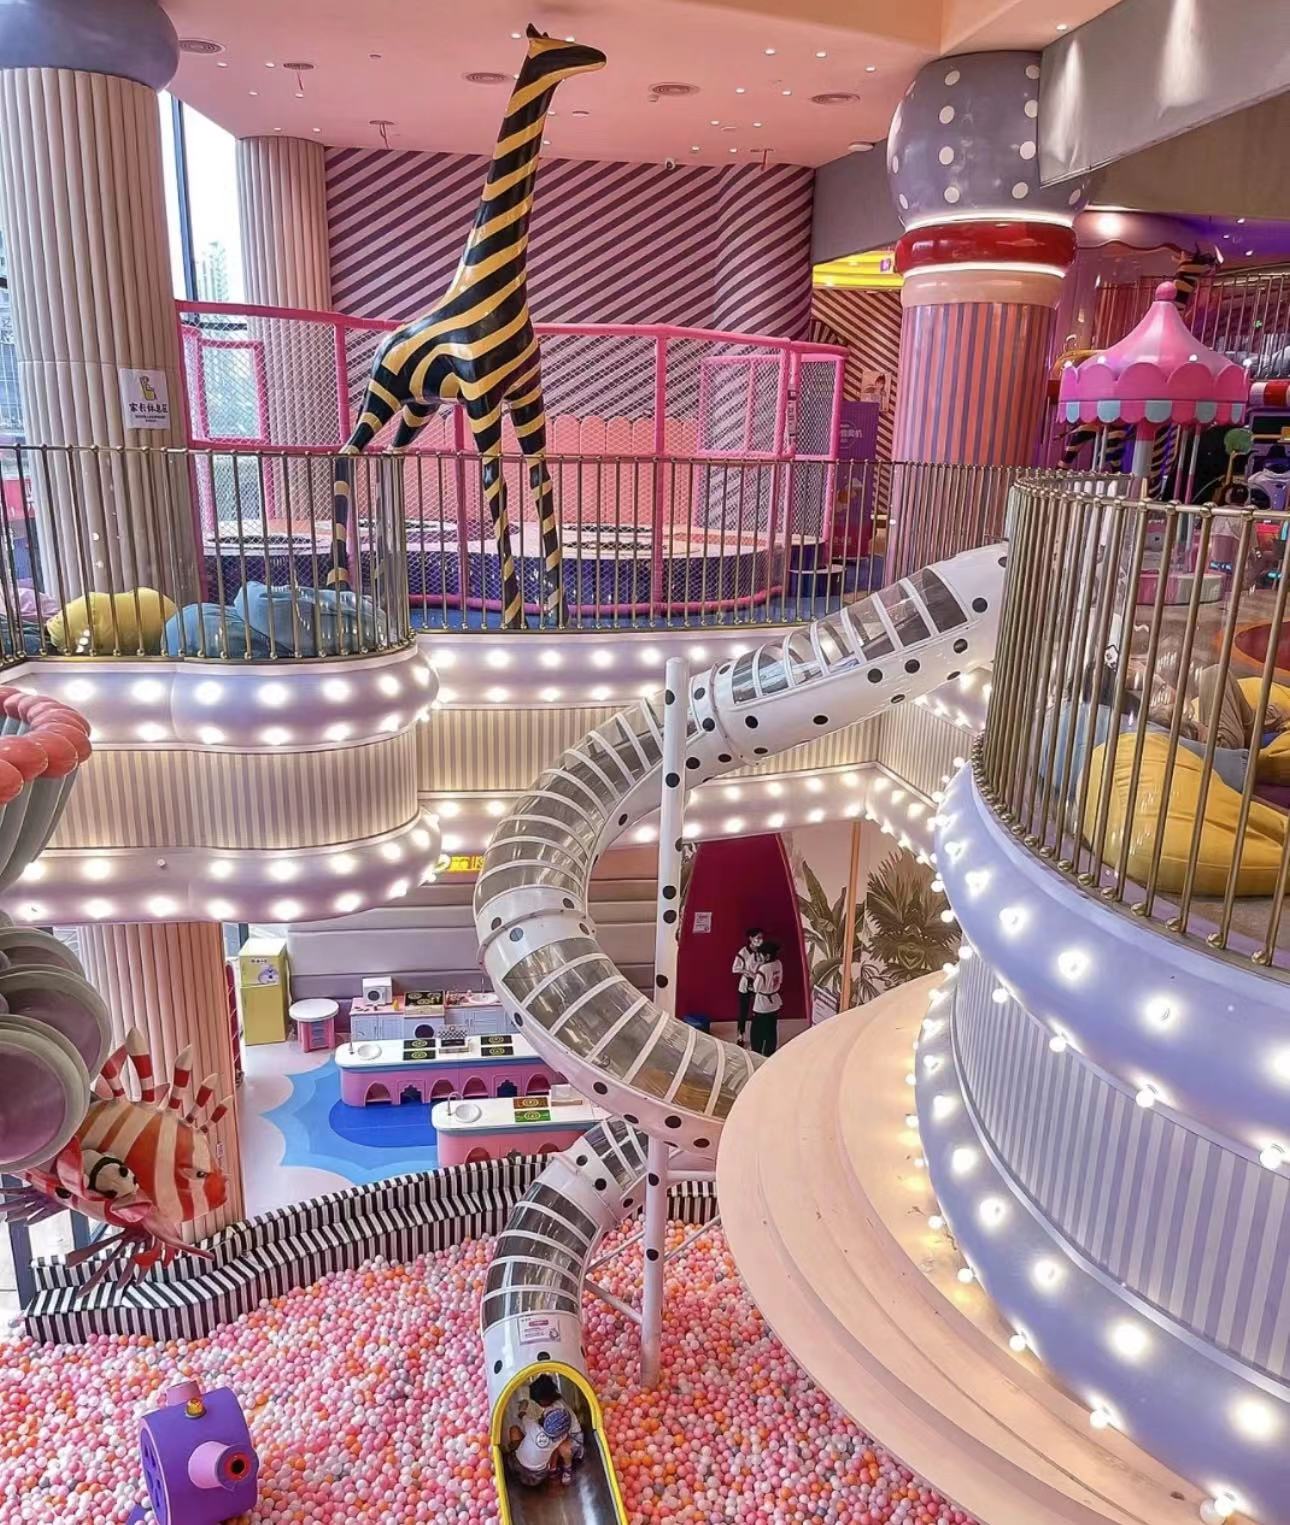 How can I make more money by running an indoor playground?